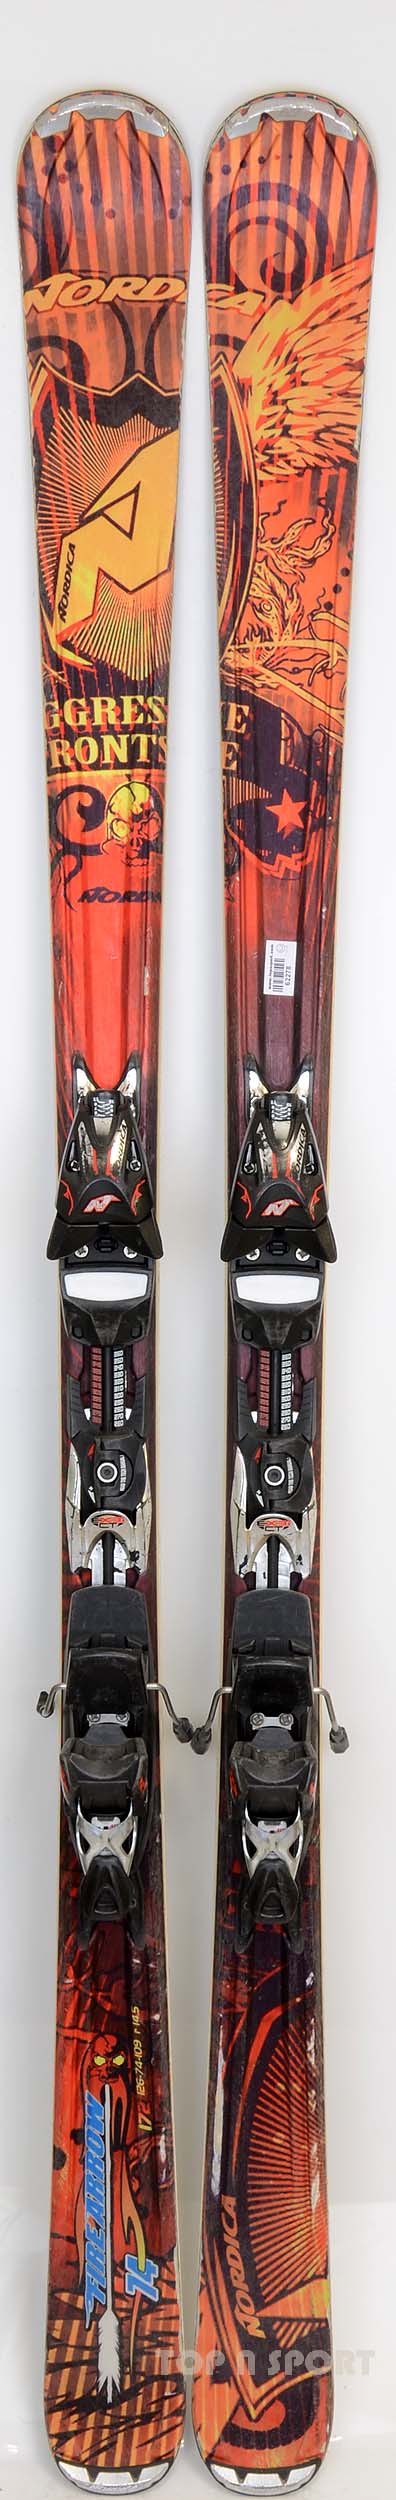 Nordica Fire Arrow 74 - skis d'occasion